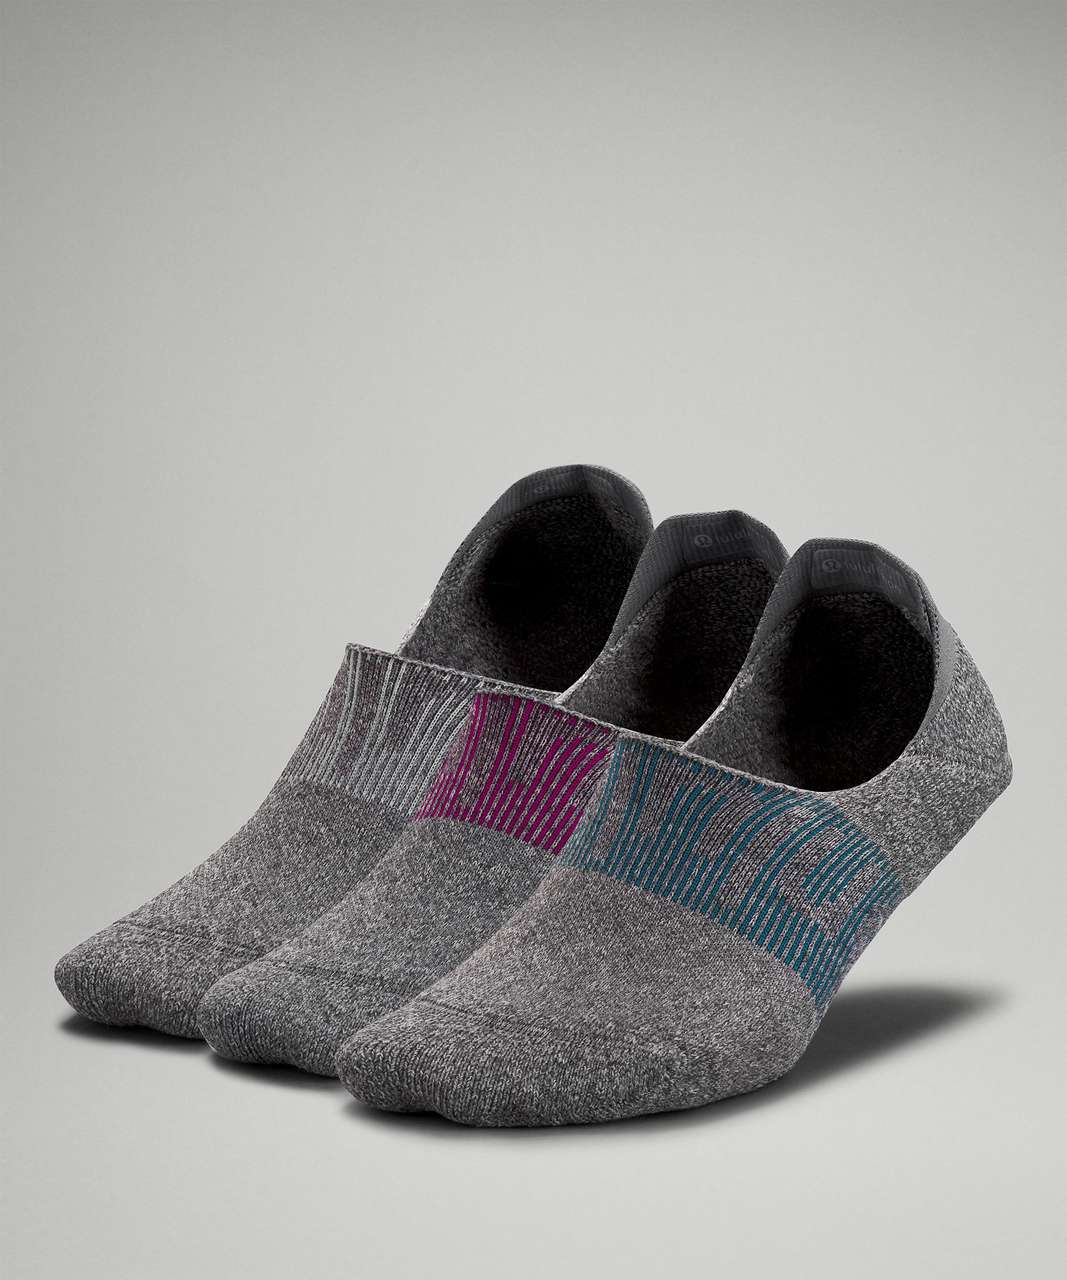 Lululemon Power Stride No-Show Sock with Active Grip *3 Pack - Heather Grey / Delicate Mint / Ripened Raspberry